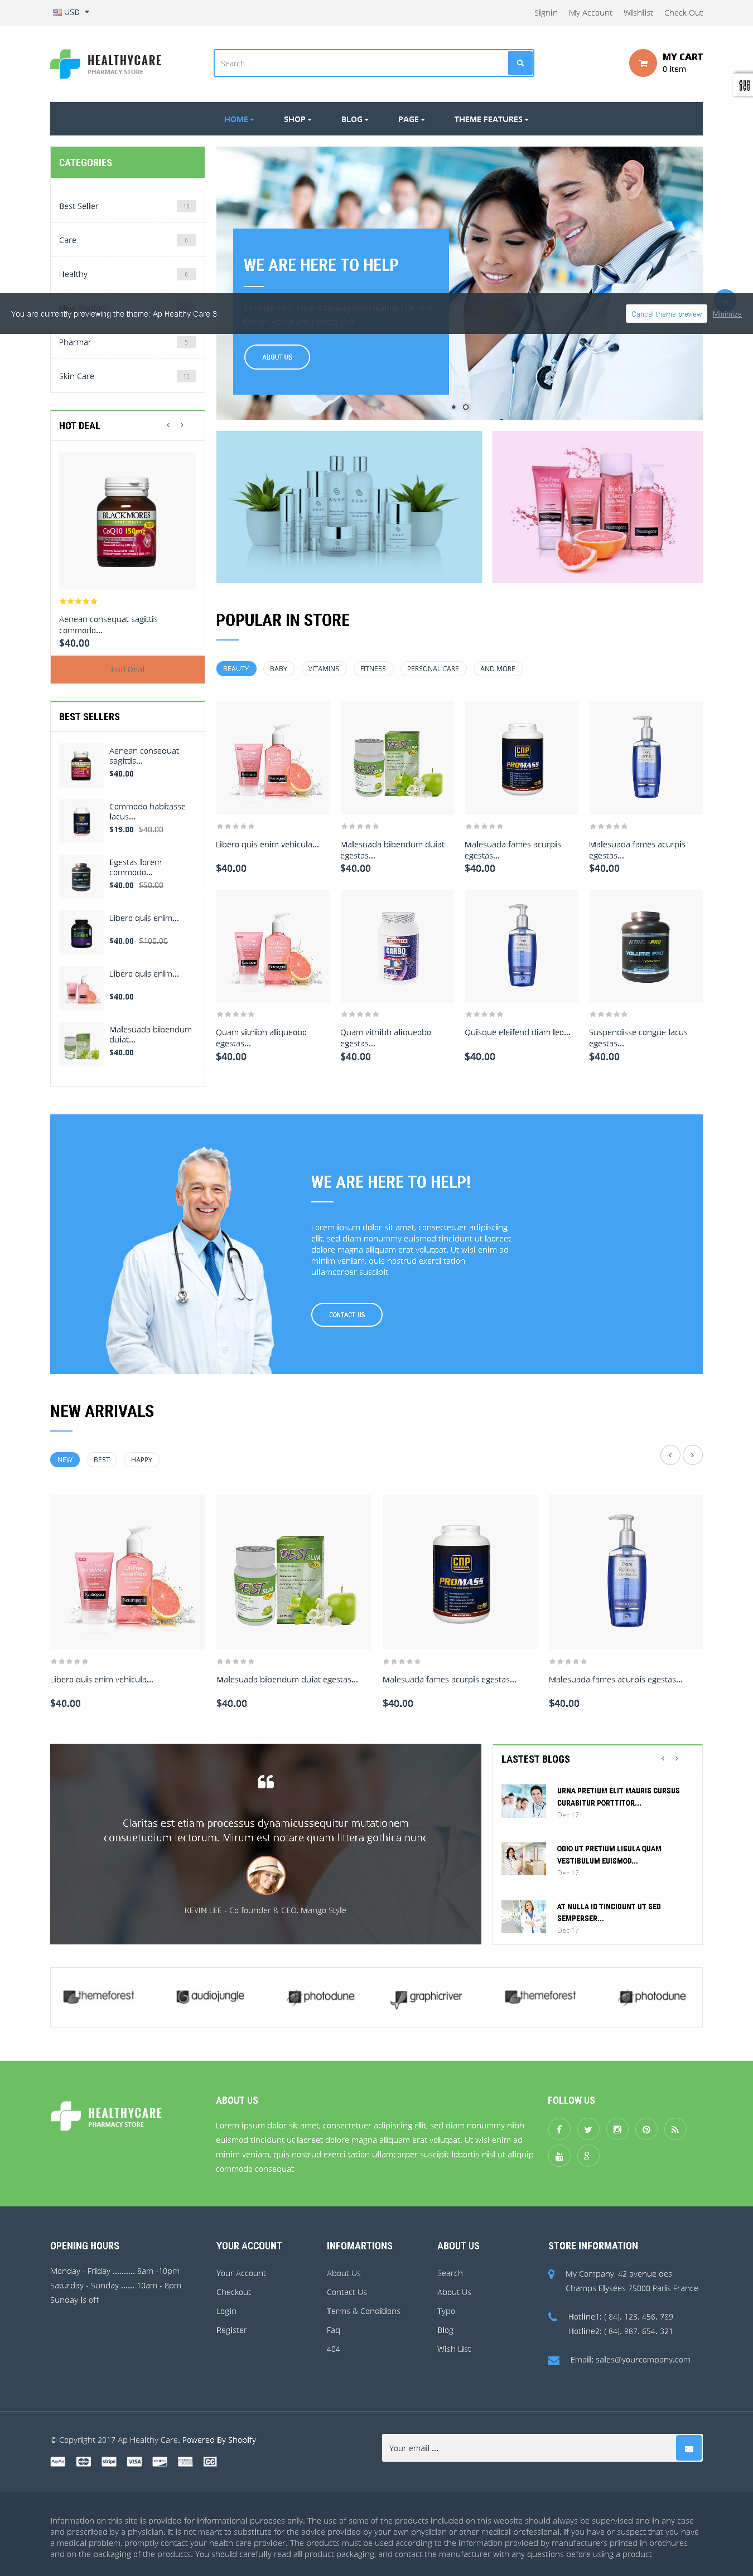 5 Best SHOPIFY Premium Themes Collection for HEALTHCARE Store 2017 - Ap Healthy Care Shopify